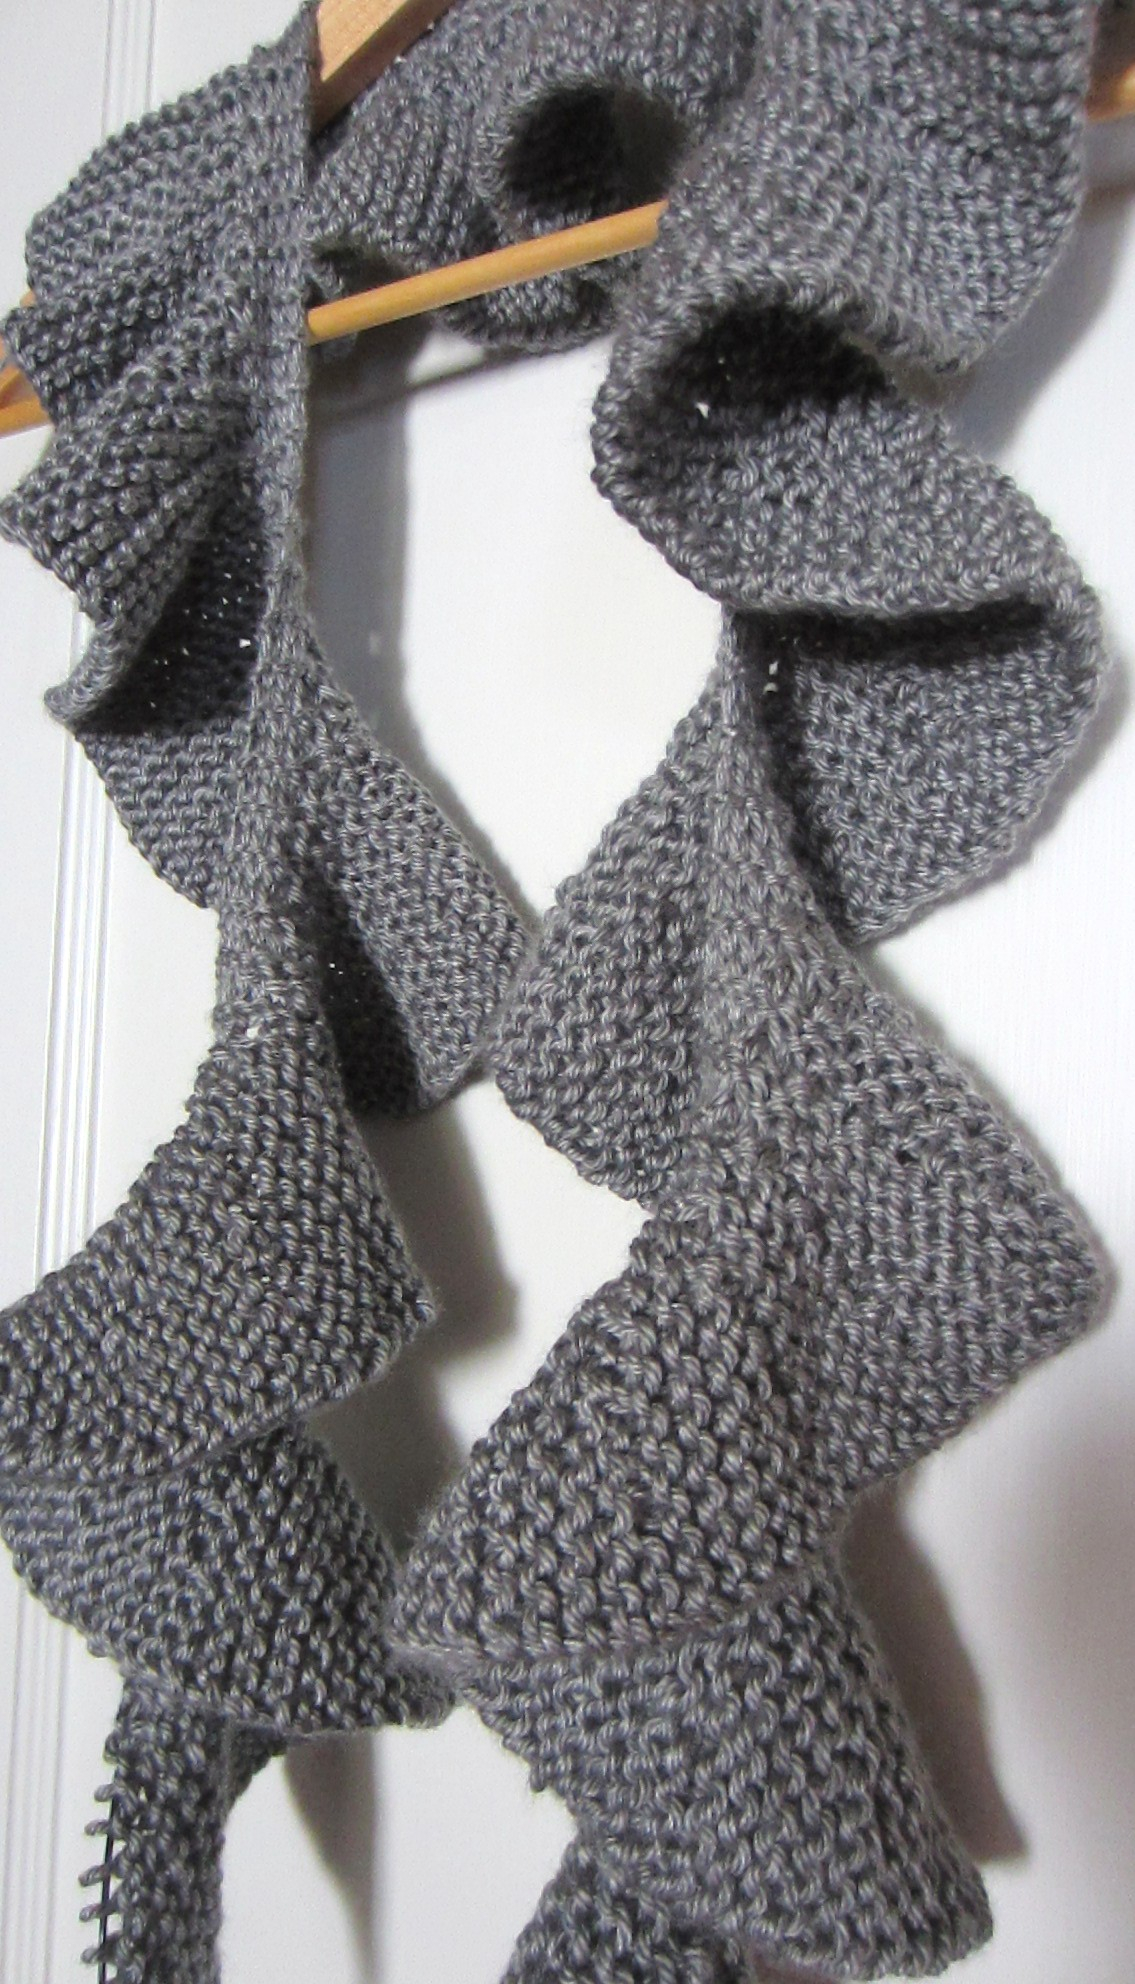 How To Knit A Ruffle Scarf Free Pattern Two Ruffle Scarves Knitting Works In Progress G Ma Ellens